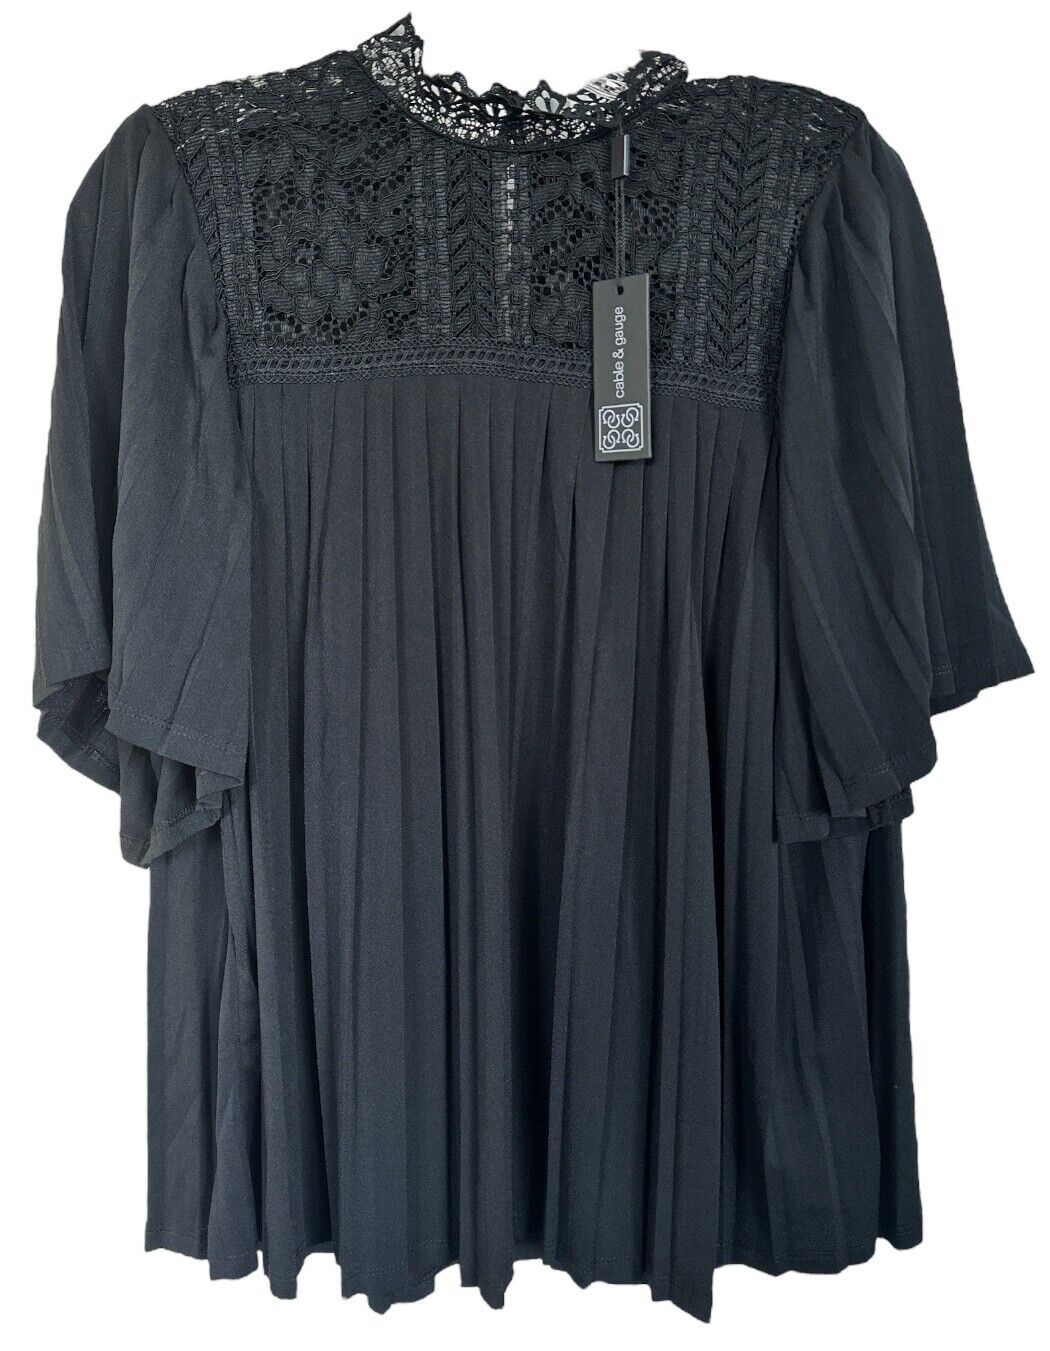 Primary image for Cable & Gauge Women's Blouse Top Short Sleeve Pleated w/Lace Size S, M Black